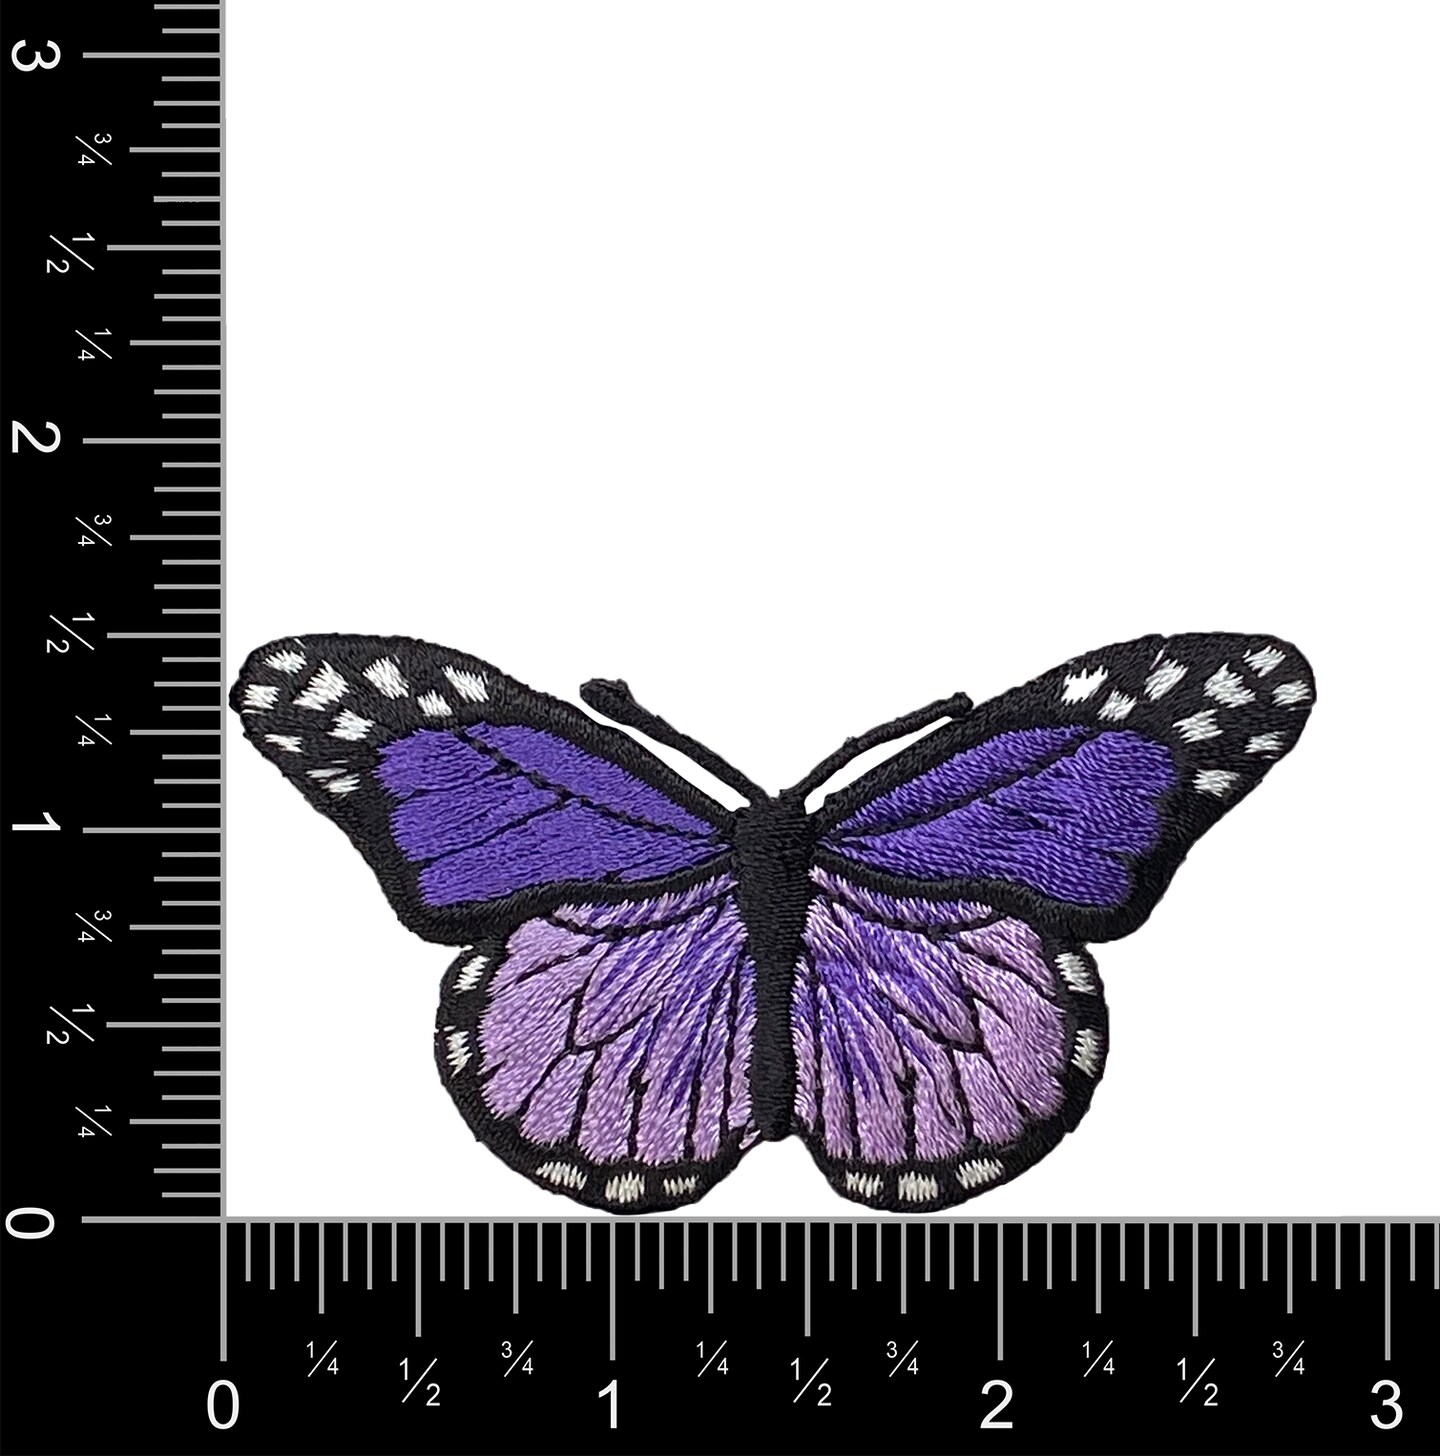 Purple Butterfly, Insects, Embroidered, Iron on Patch